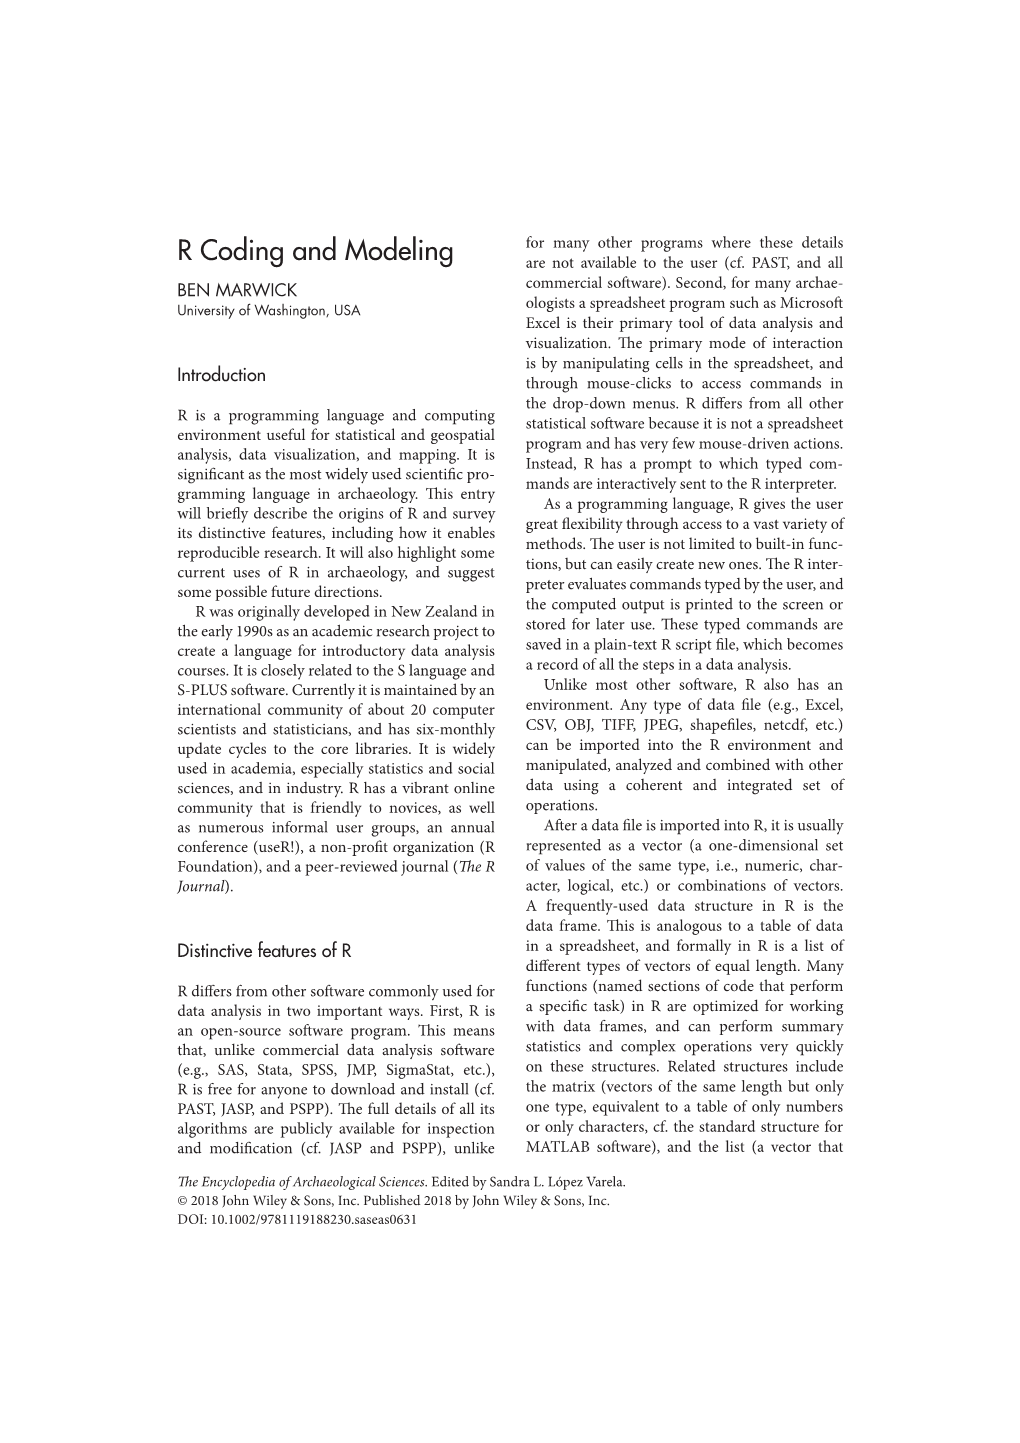 "R Coding and Modeling" In: the Encyclopedia of Archaeological